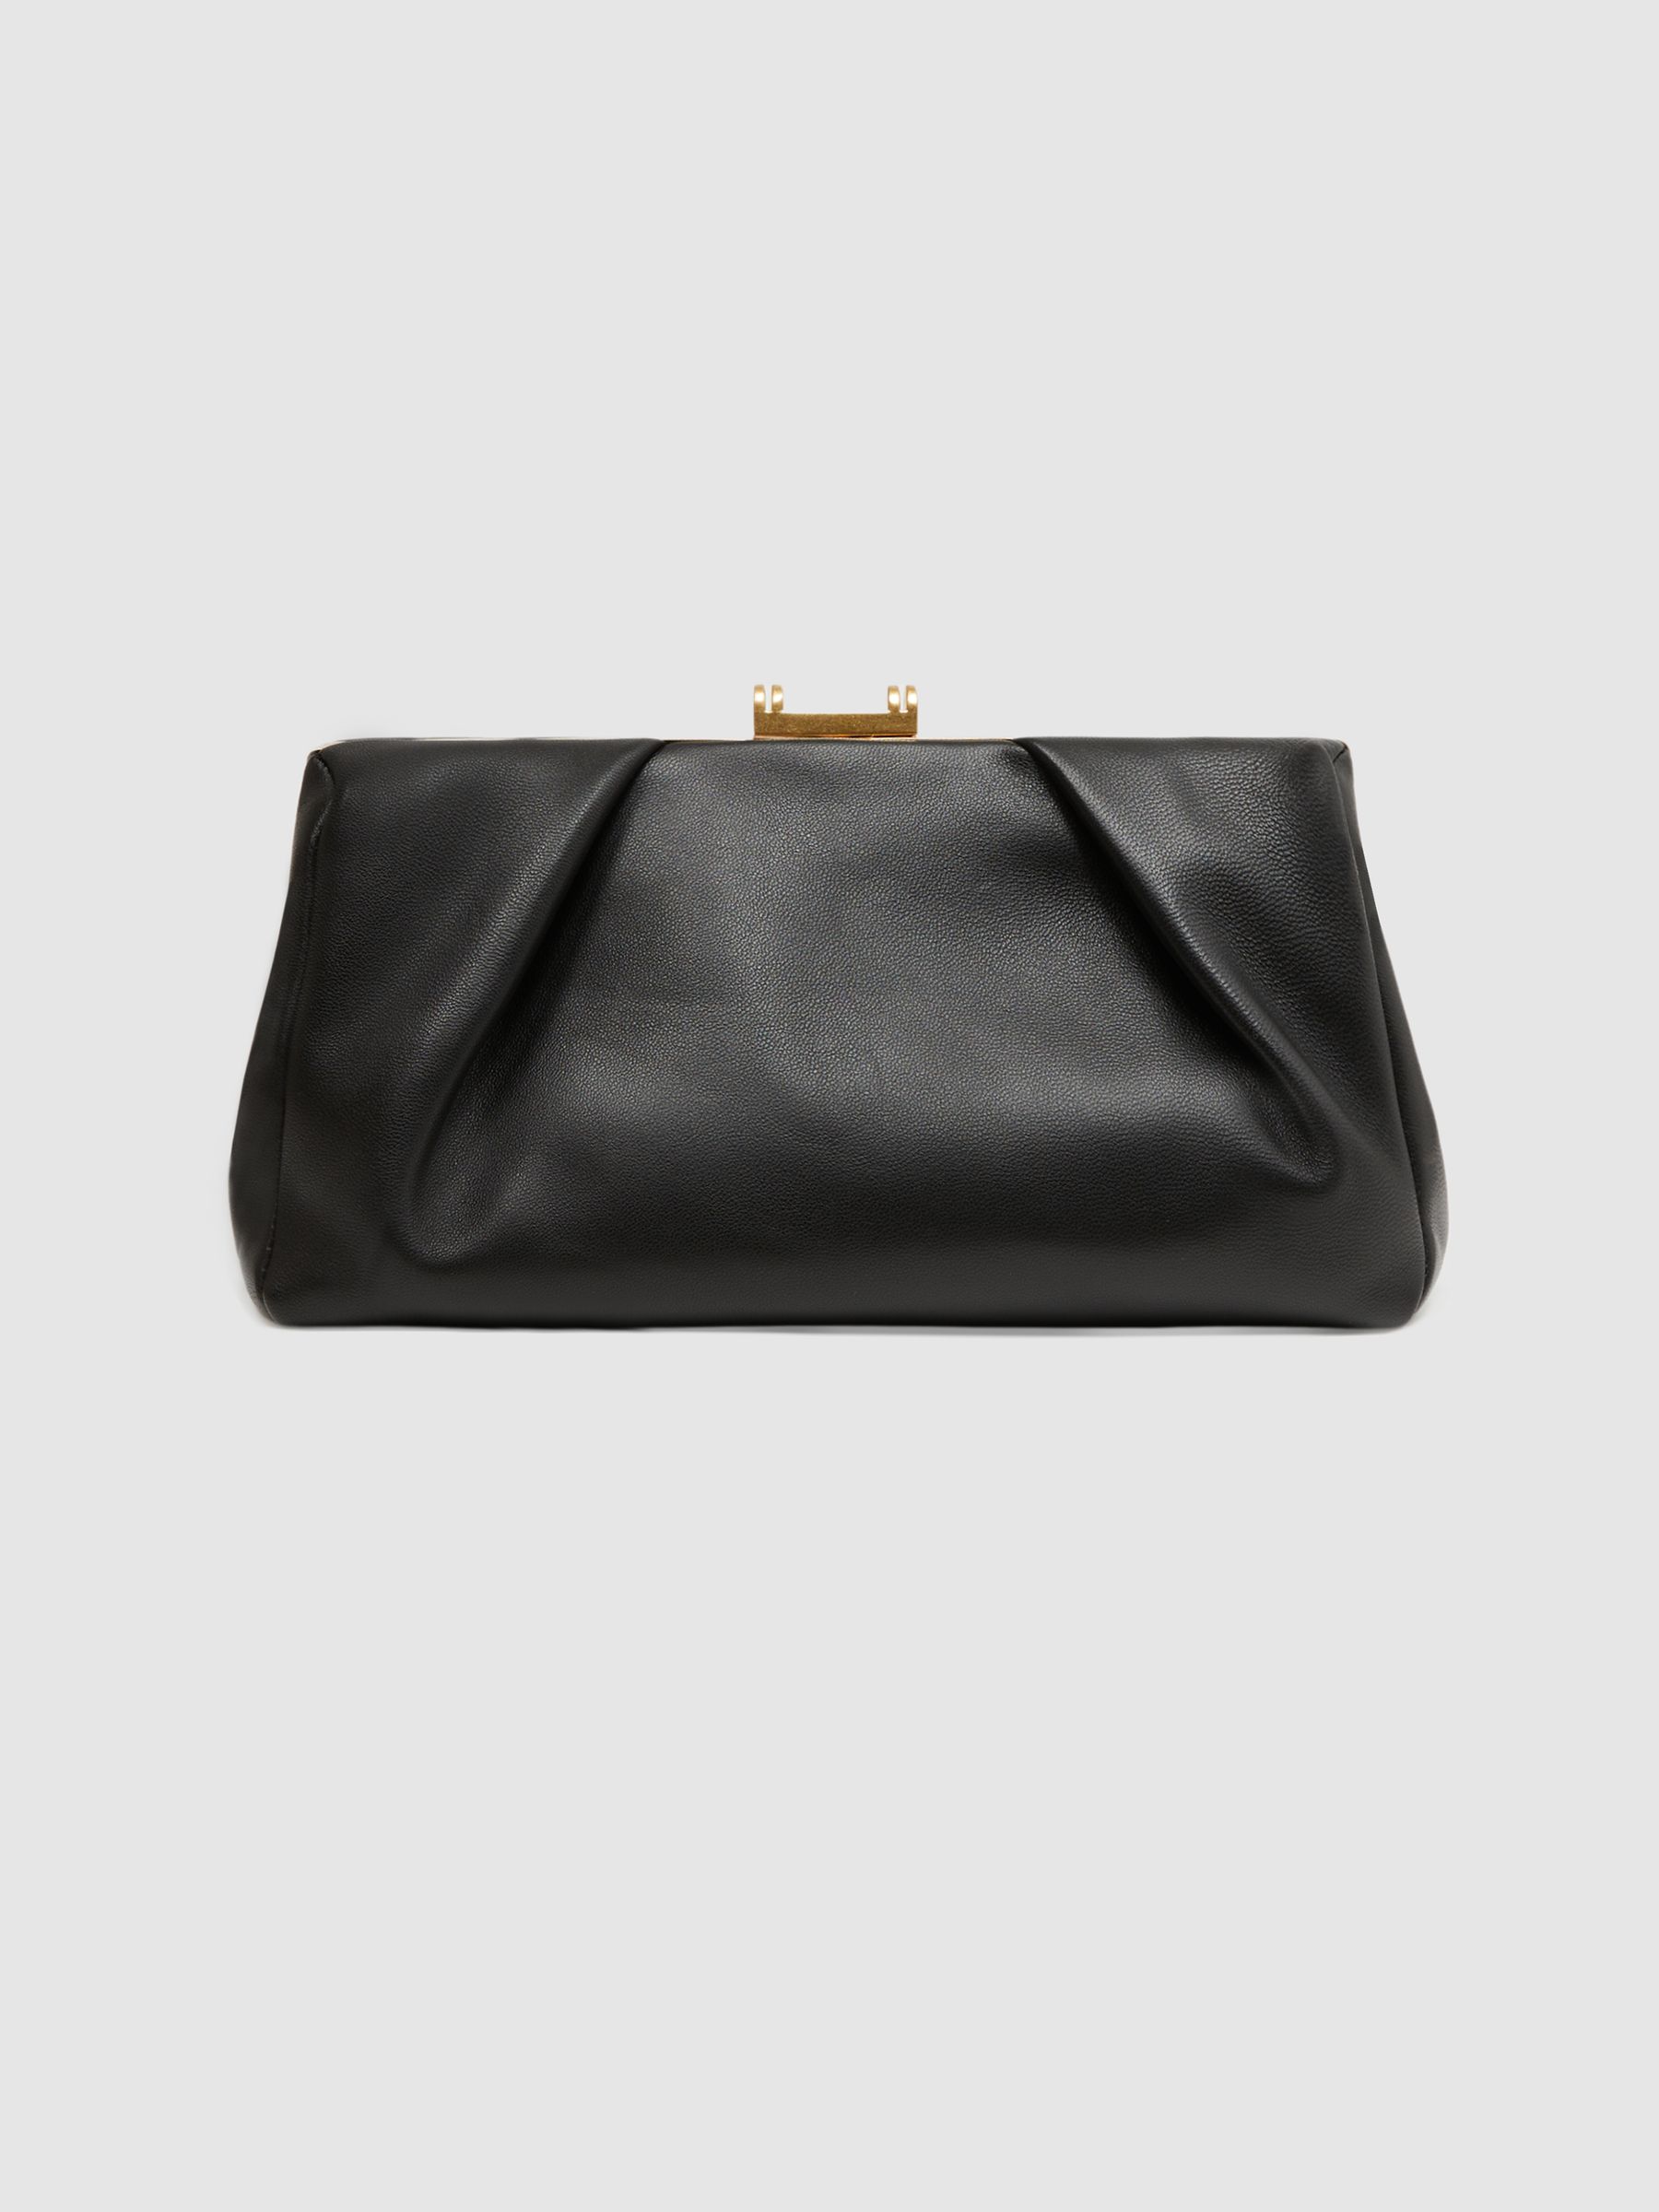 Reiss Madison Leather Clutch Bag | REISS USA